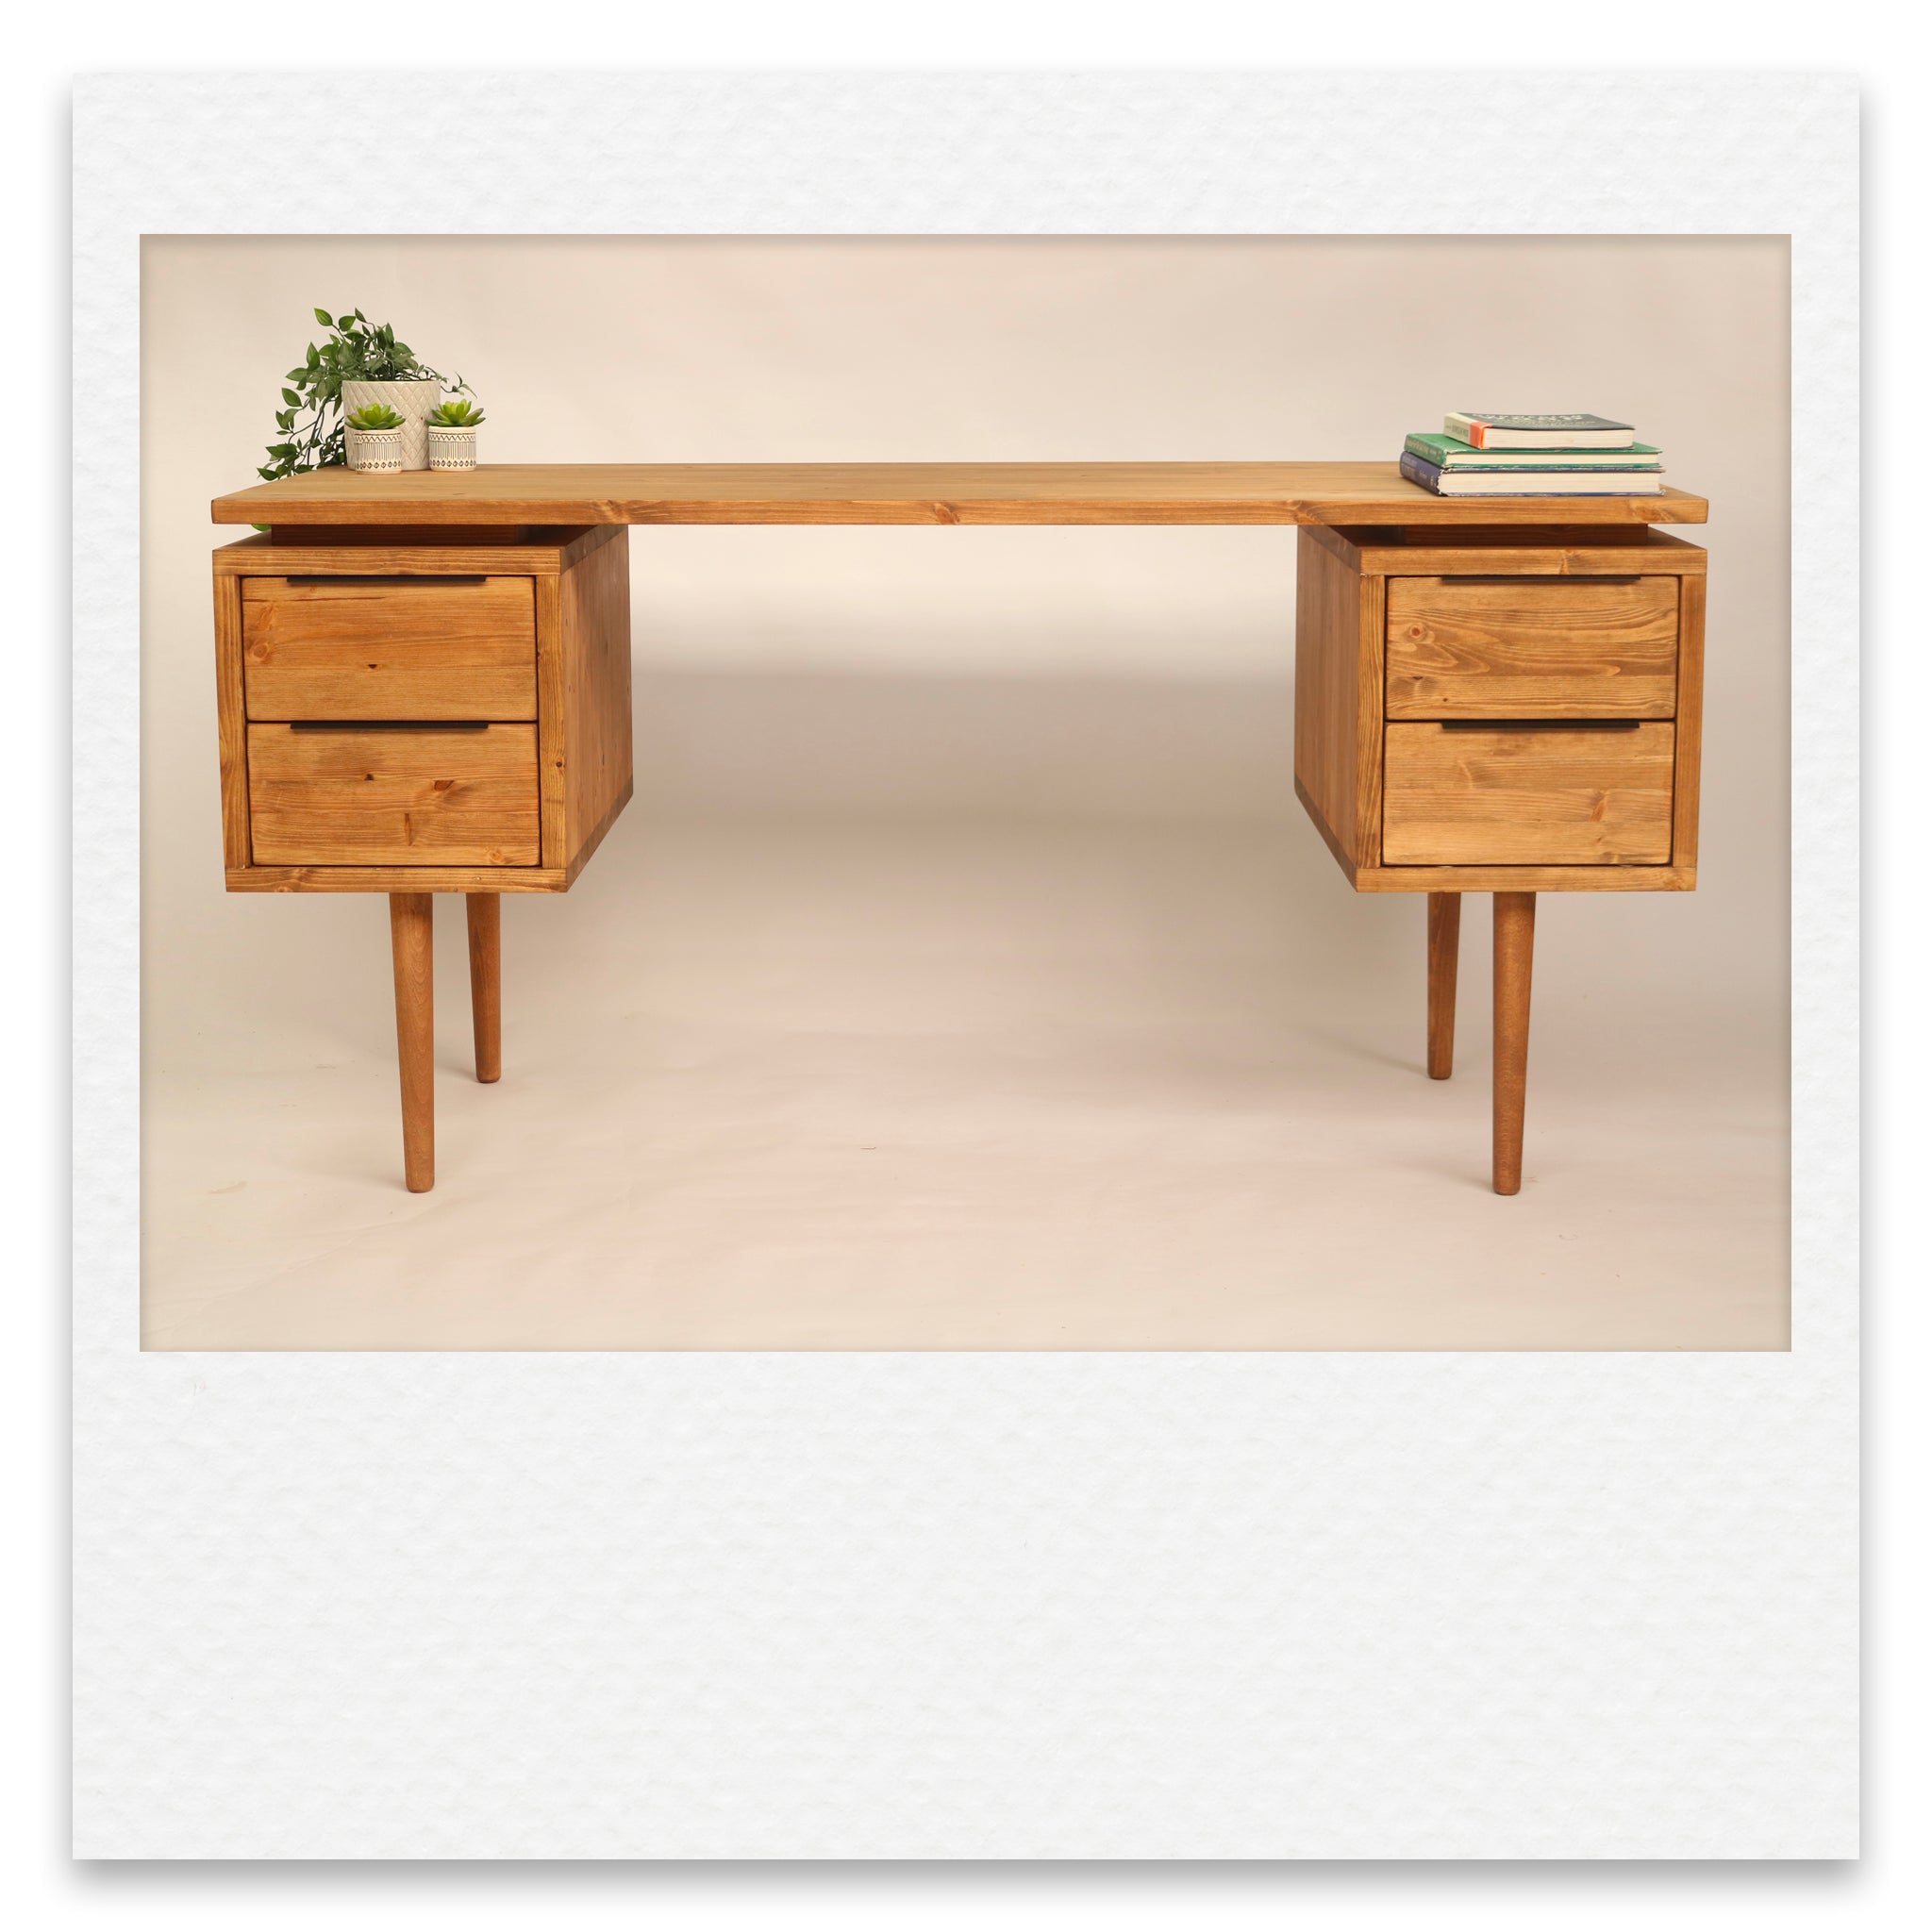 Large Executive Wooden Desk with Double Pedestal Drawers